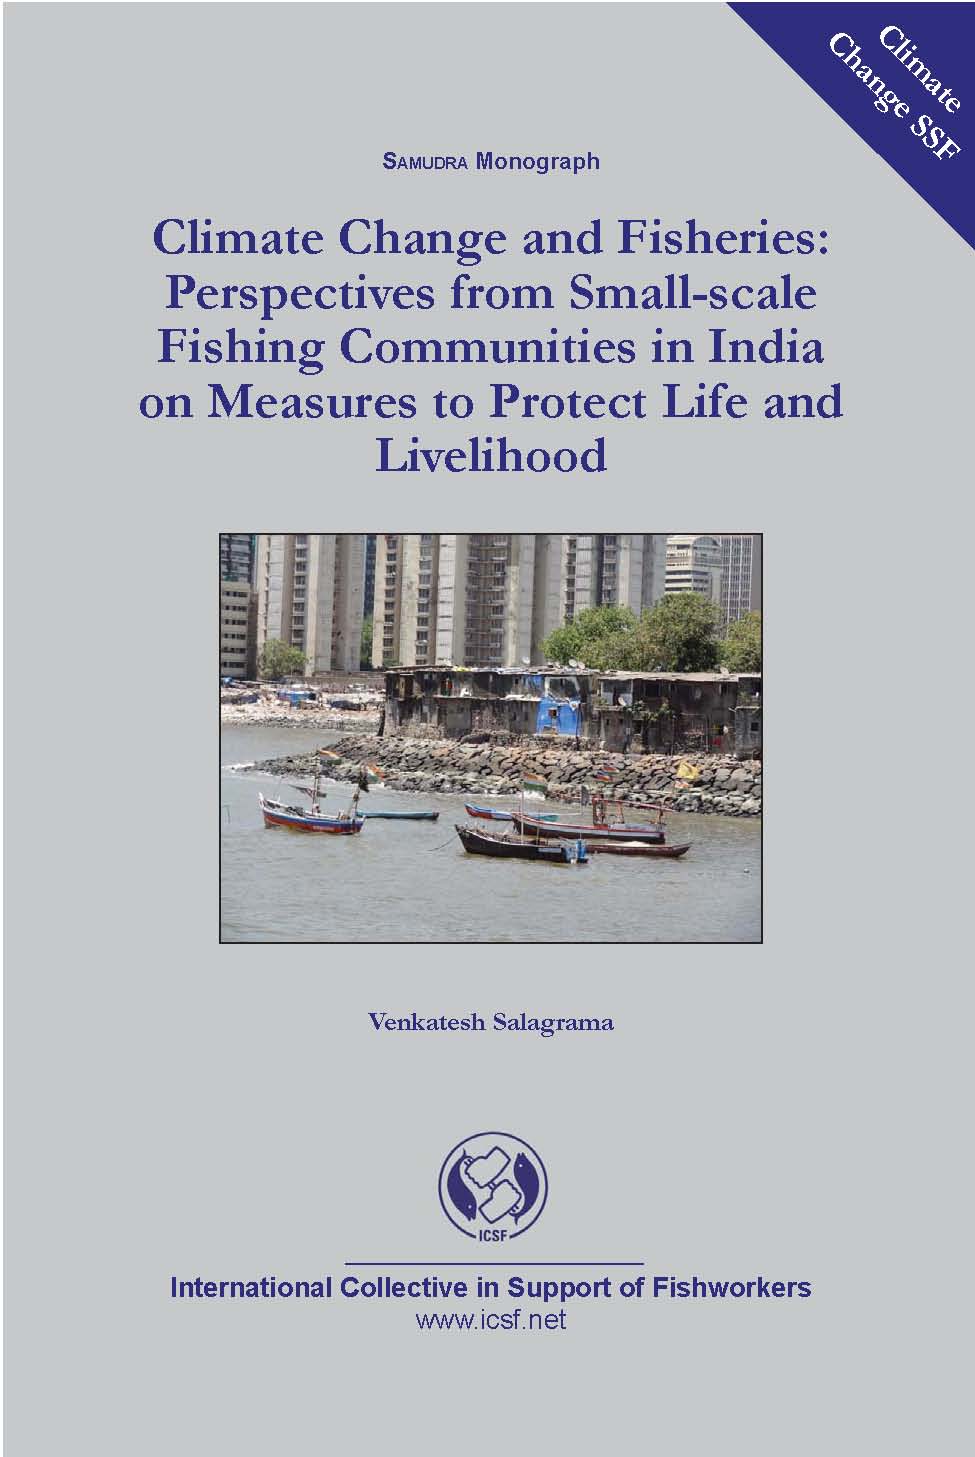 Climate Change and Fisheries: Perspectives from Small-scale Fishing Communities in India on Measures to Protect Life and Livelihood